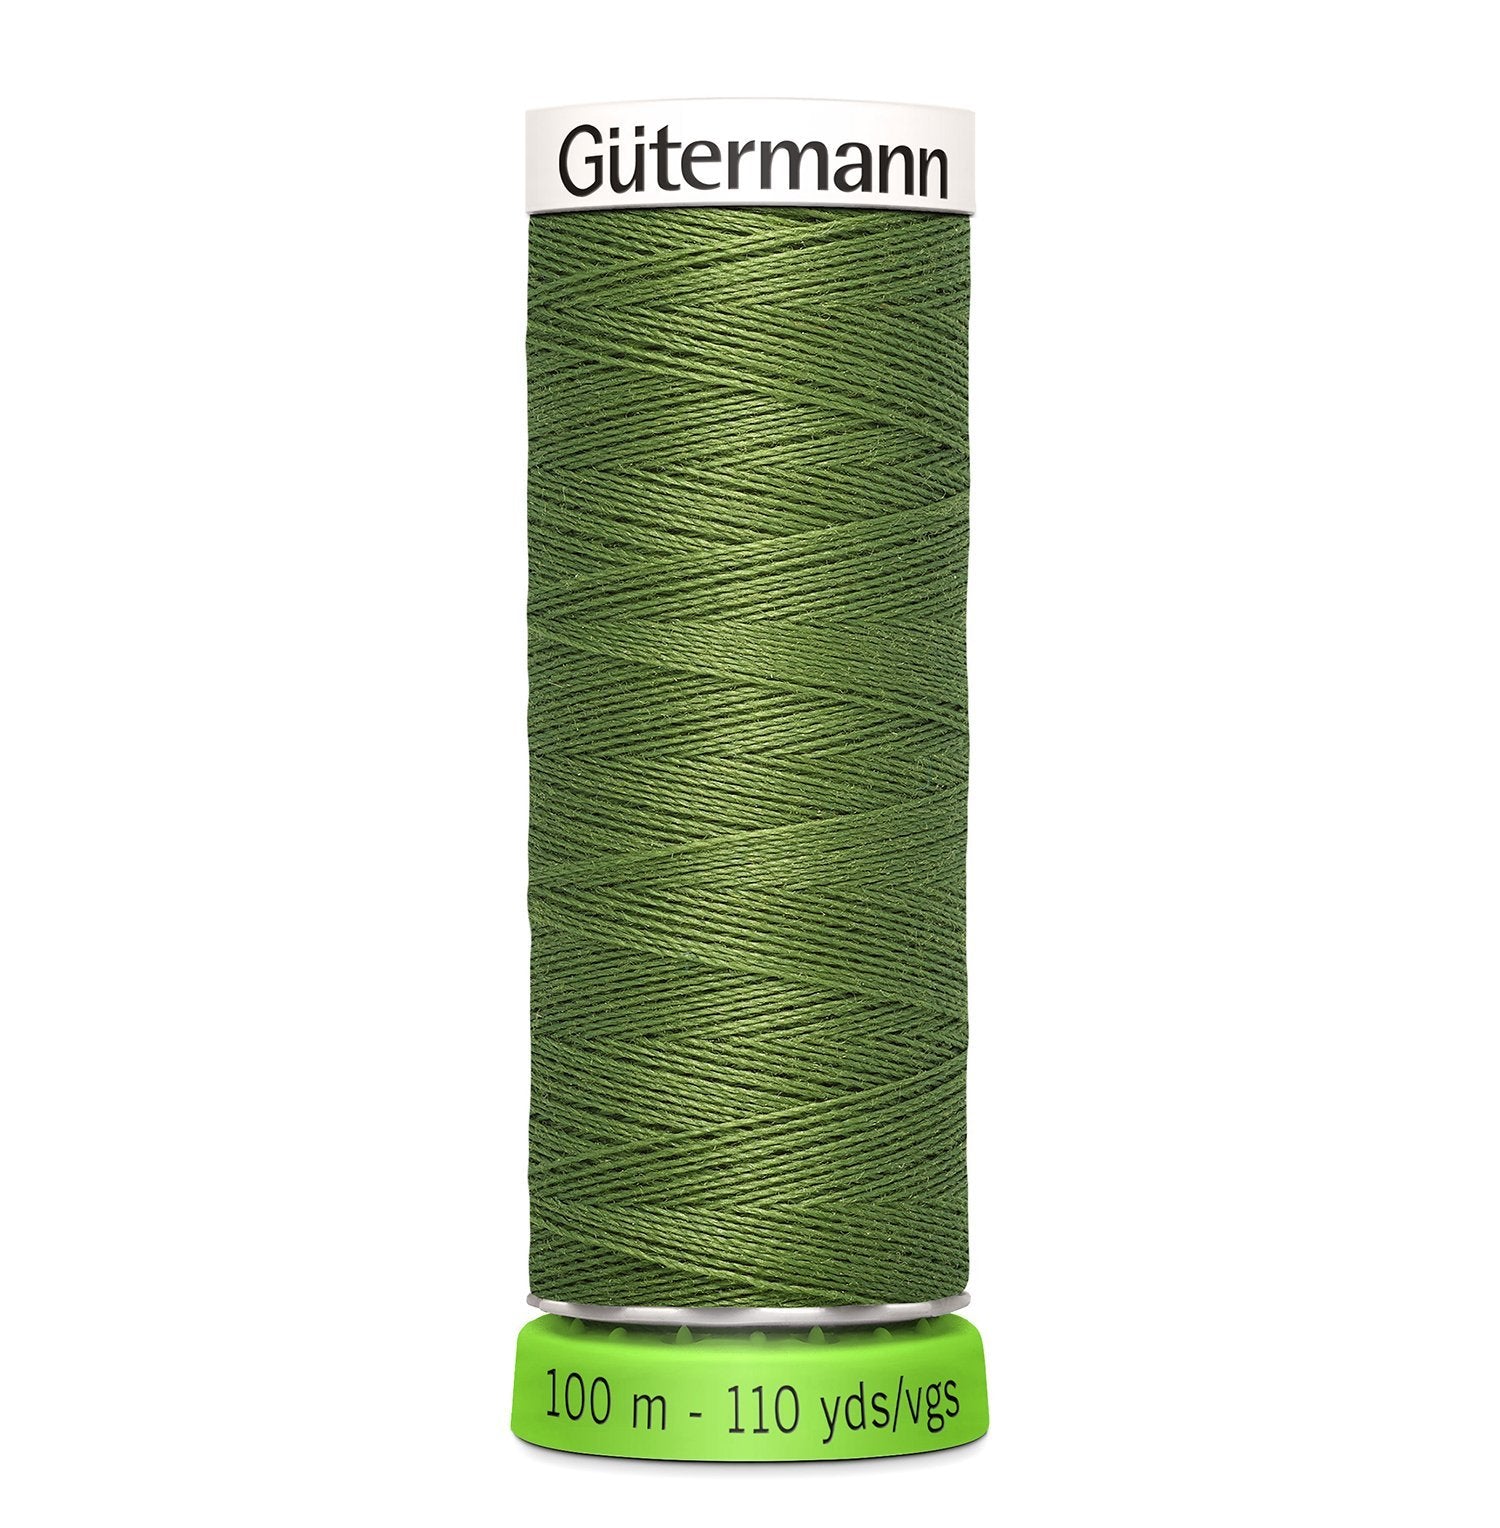 Gutermann Recycled Thread 100m, Colour 283 from Jaycotts Sewing Supplies